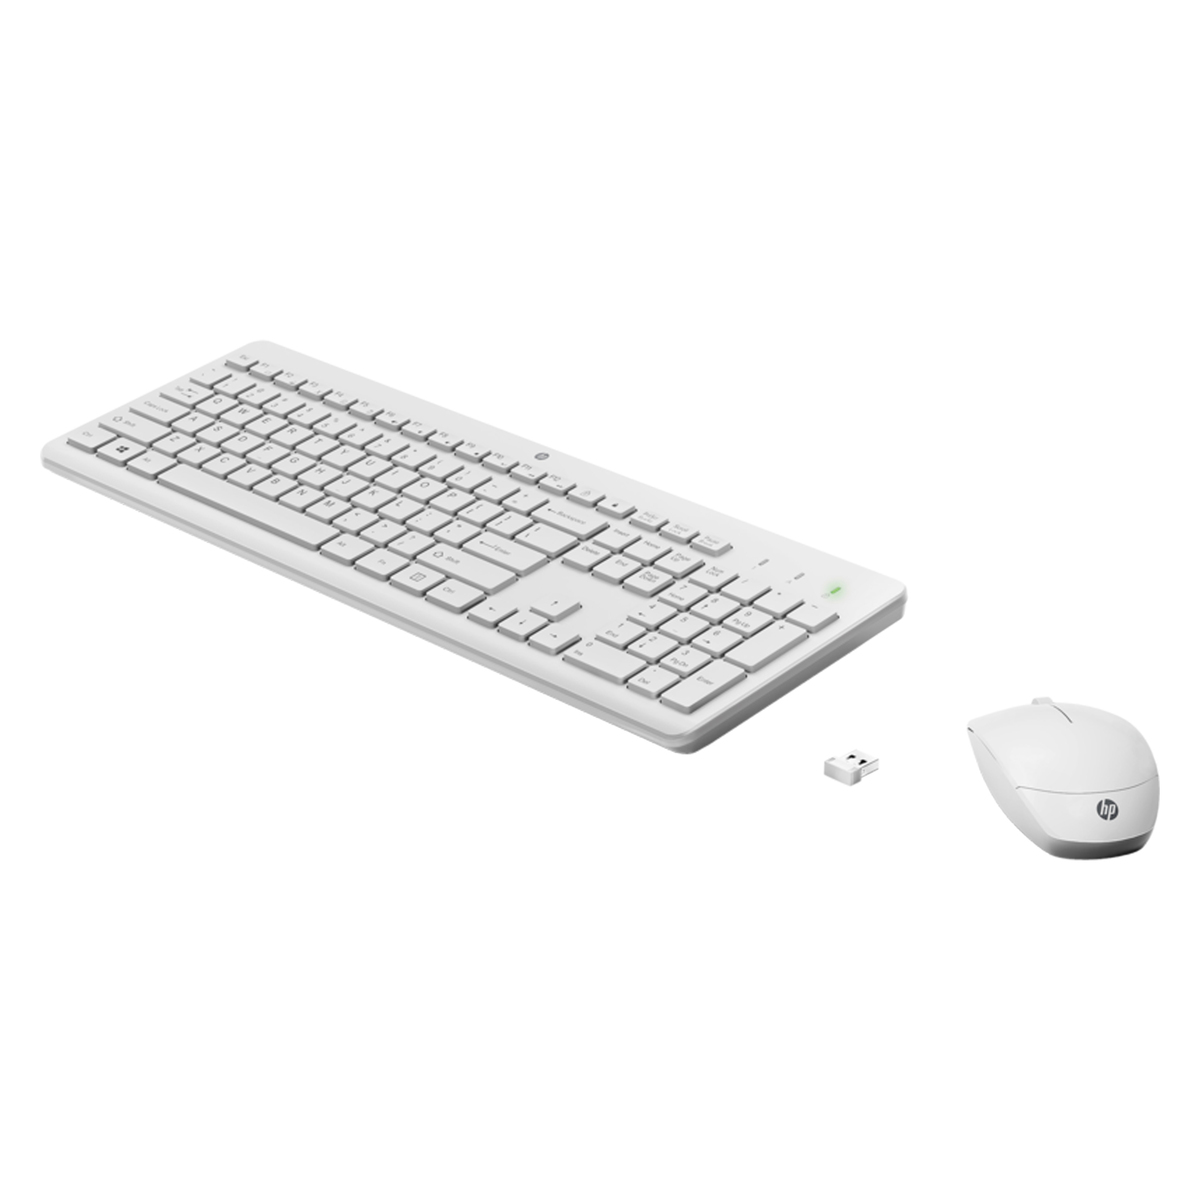 HP 230 Wireless Keyboard and Mouse Combo, 1600 DPI, Assorted Color